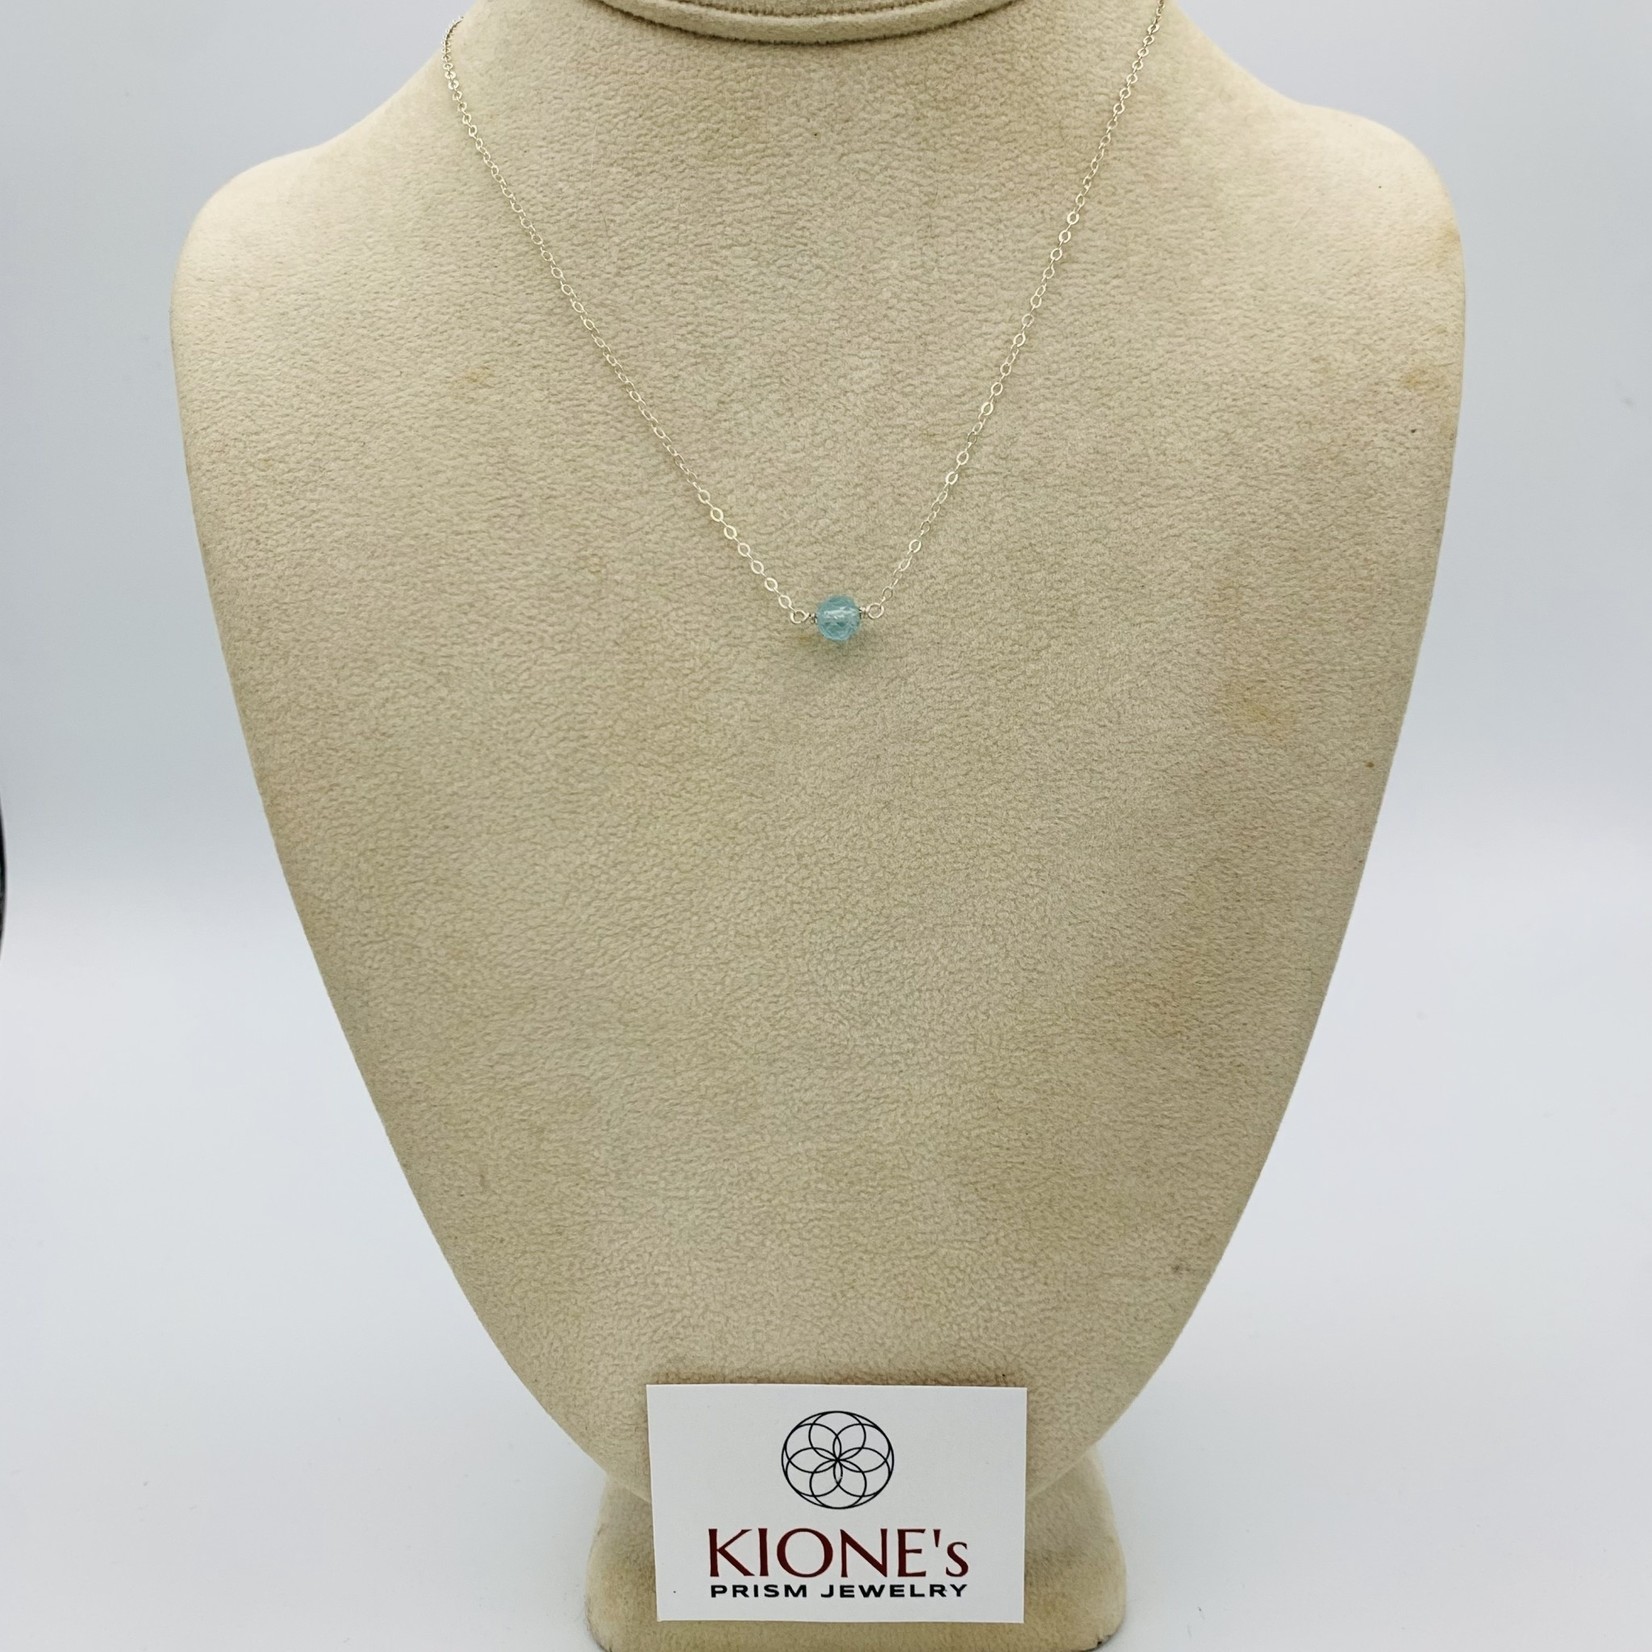 Kione’s Prism Jewelry Solitaire Apatite on Sterling Silver Necklace